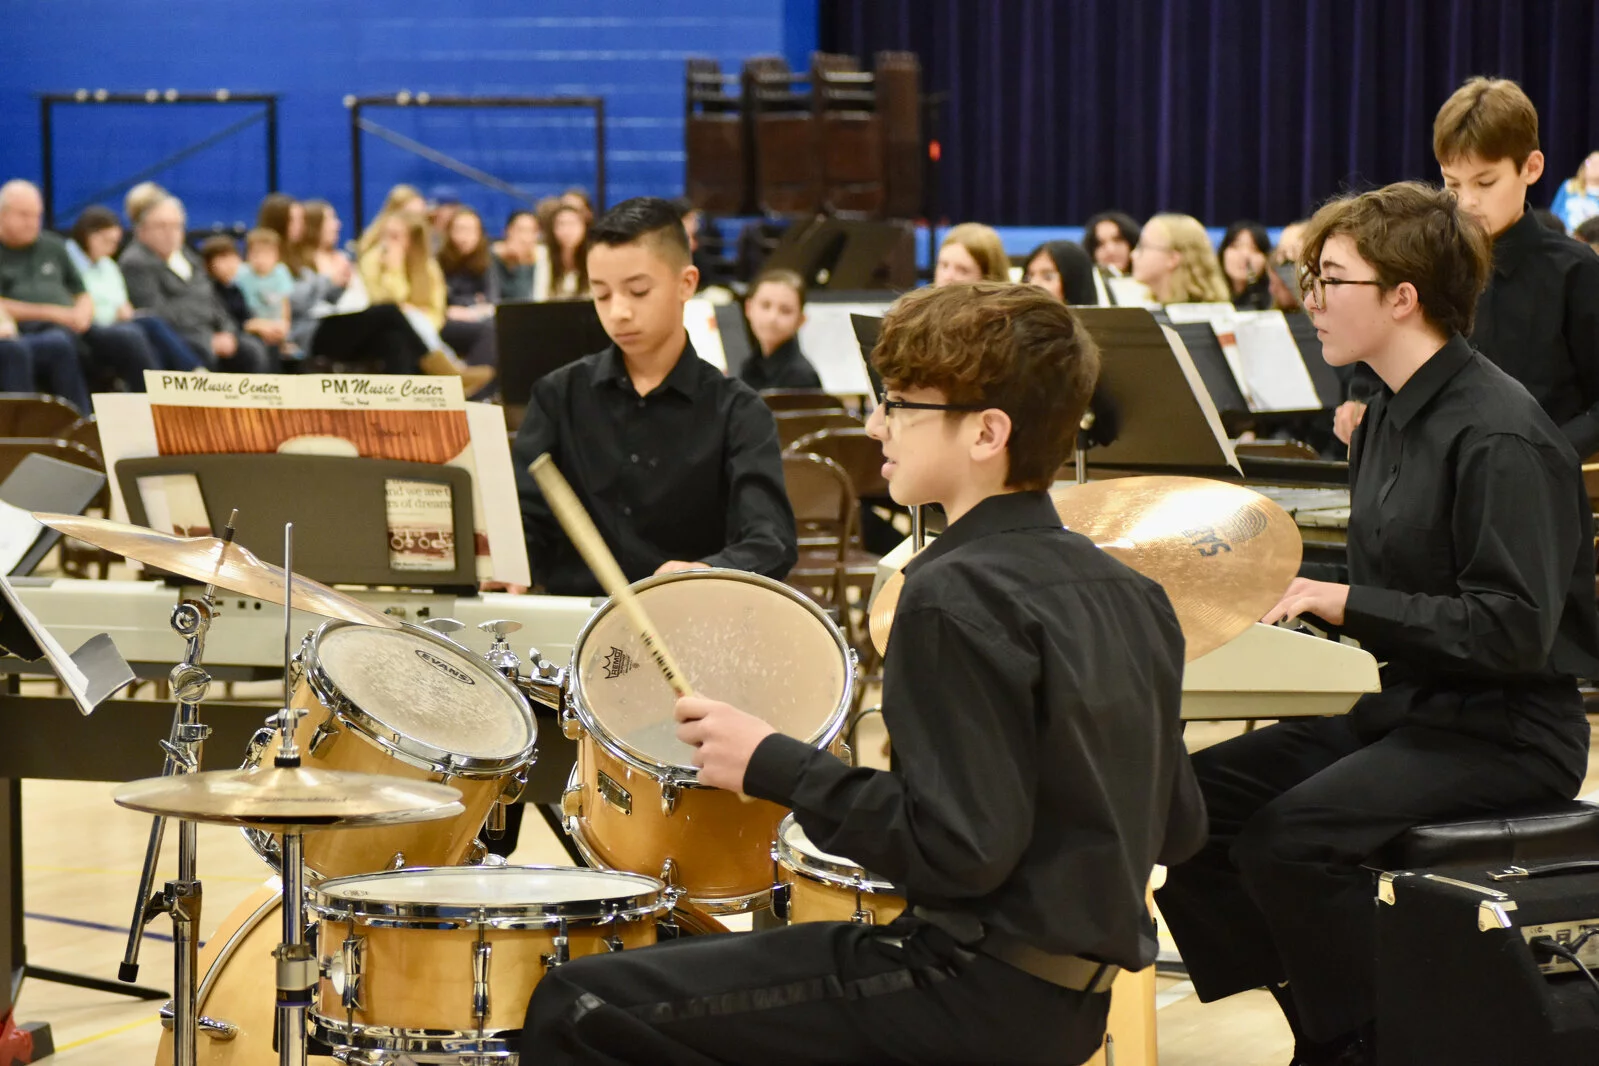 Drummer playing drum kit during fall band concert